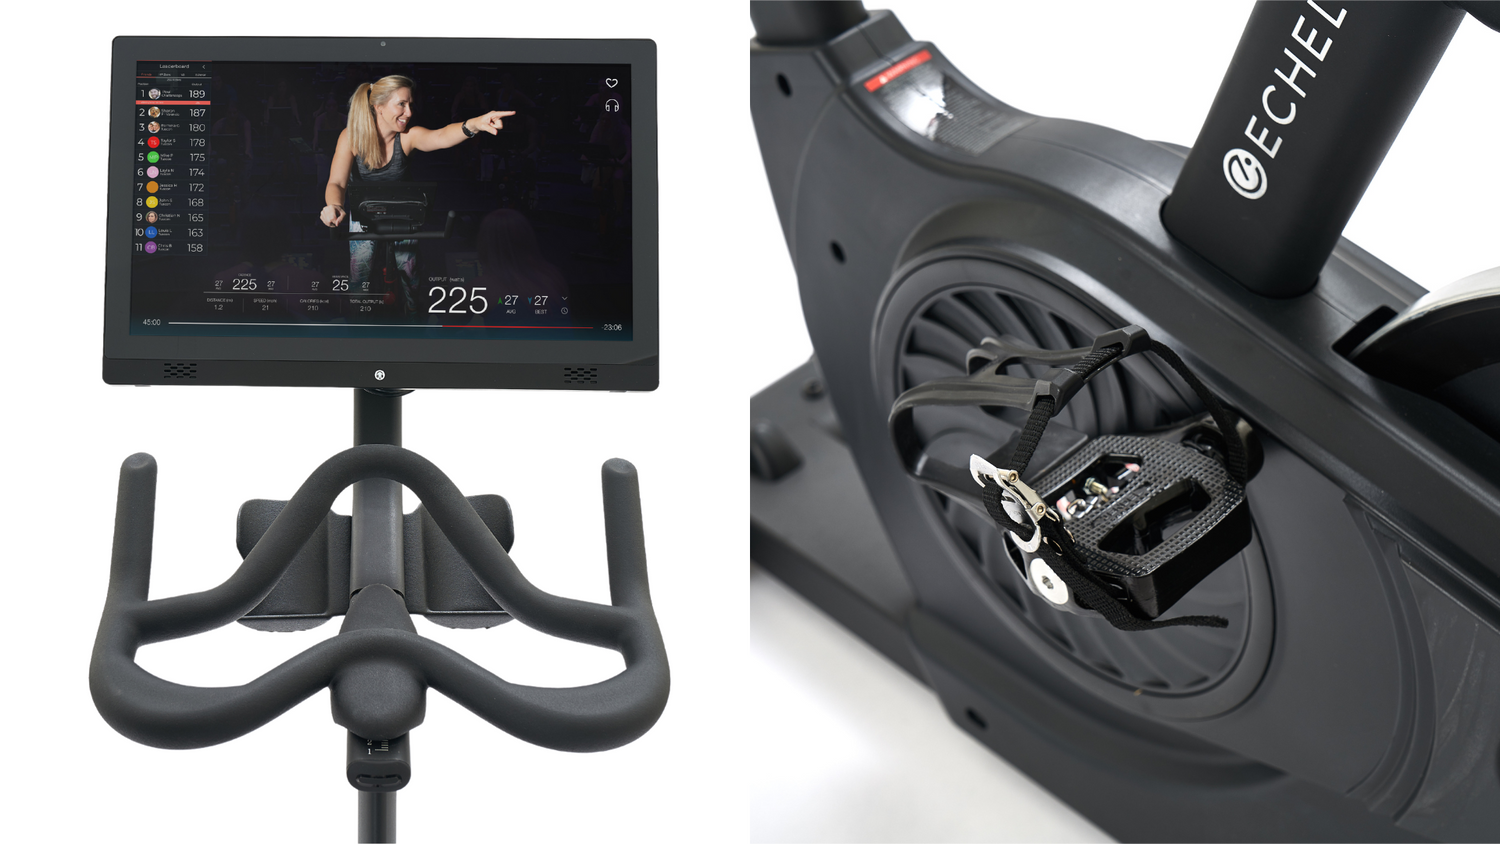 Close up detail shots of the Echelon commercial spin bike for sale